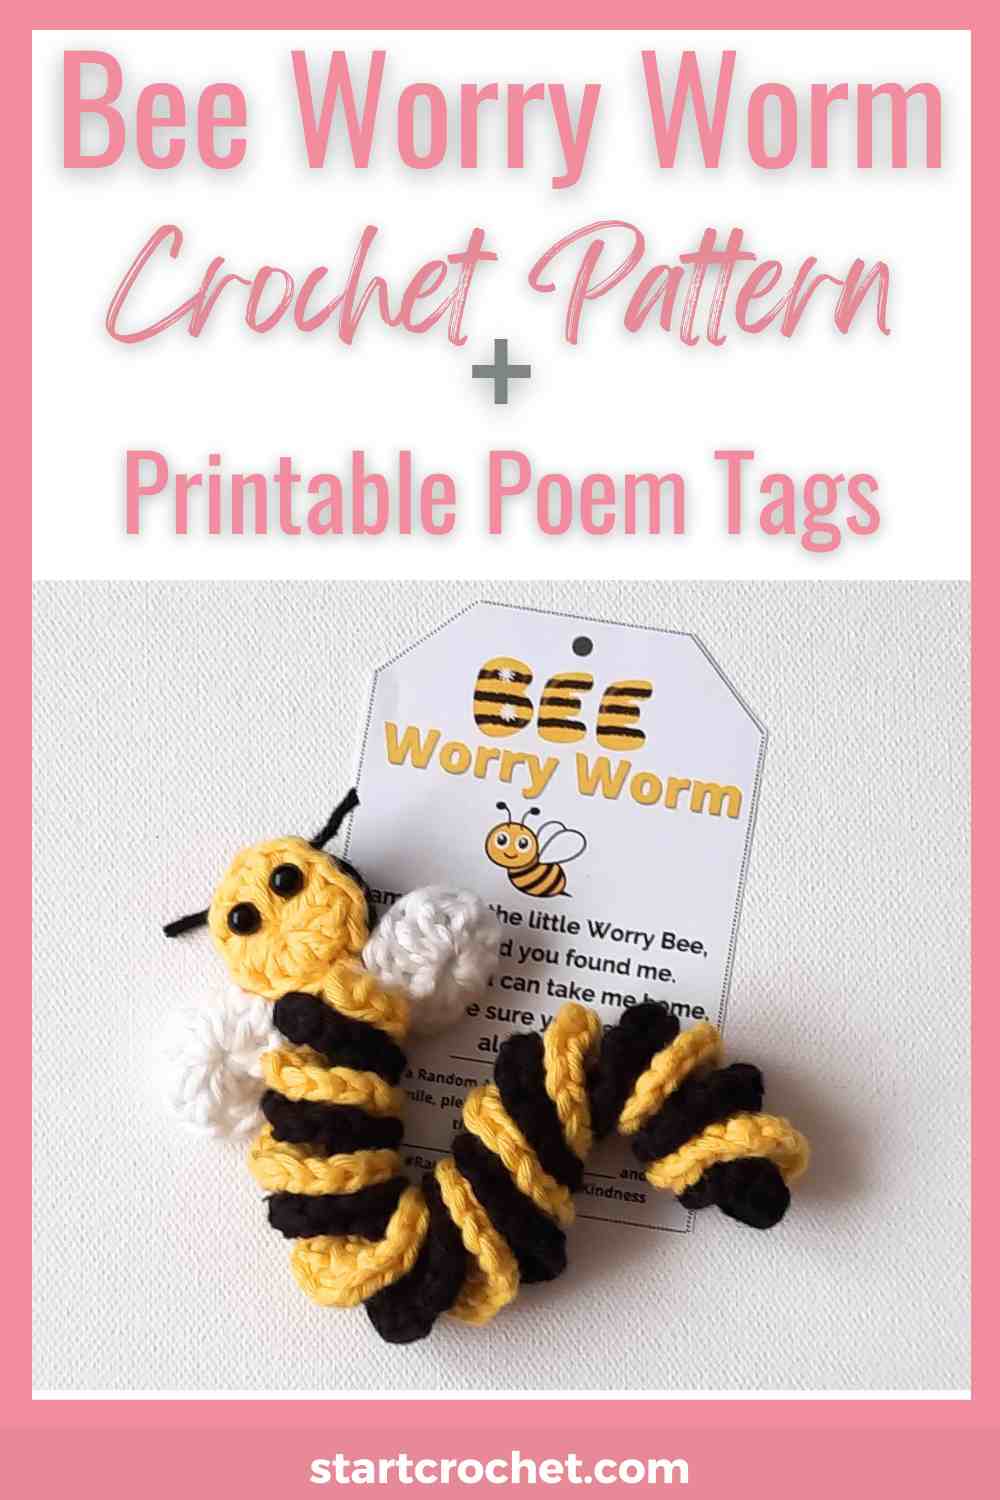 Bee Worry Worm Crochet Pattern + Printable Poem Tags